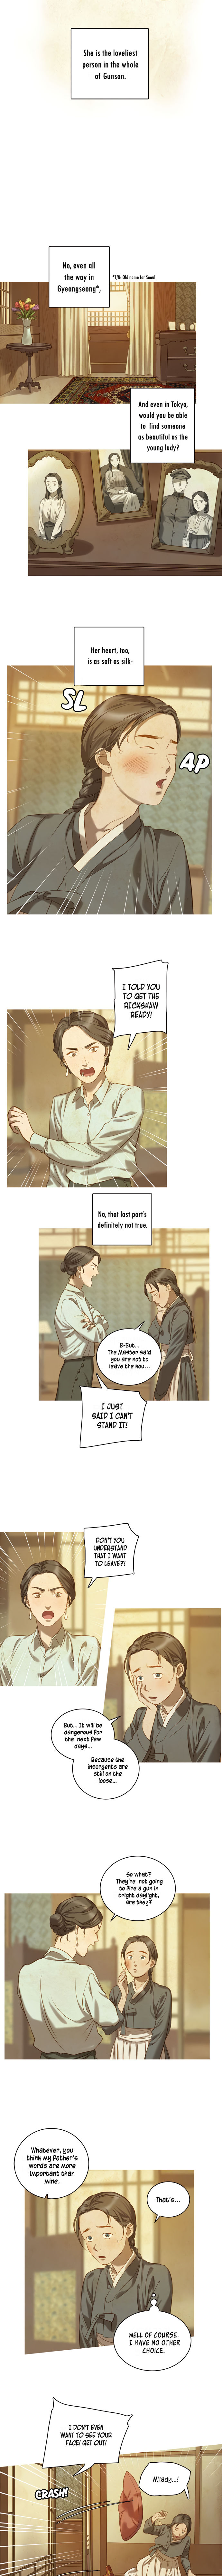 Gorae Byul - The Gyeongseong Mermaid - Chapter 1 Page 14